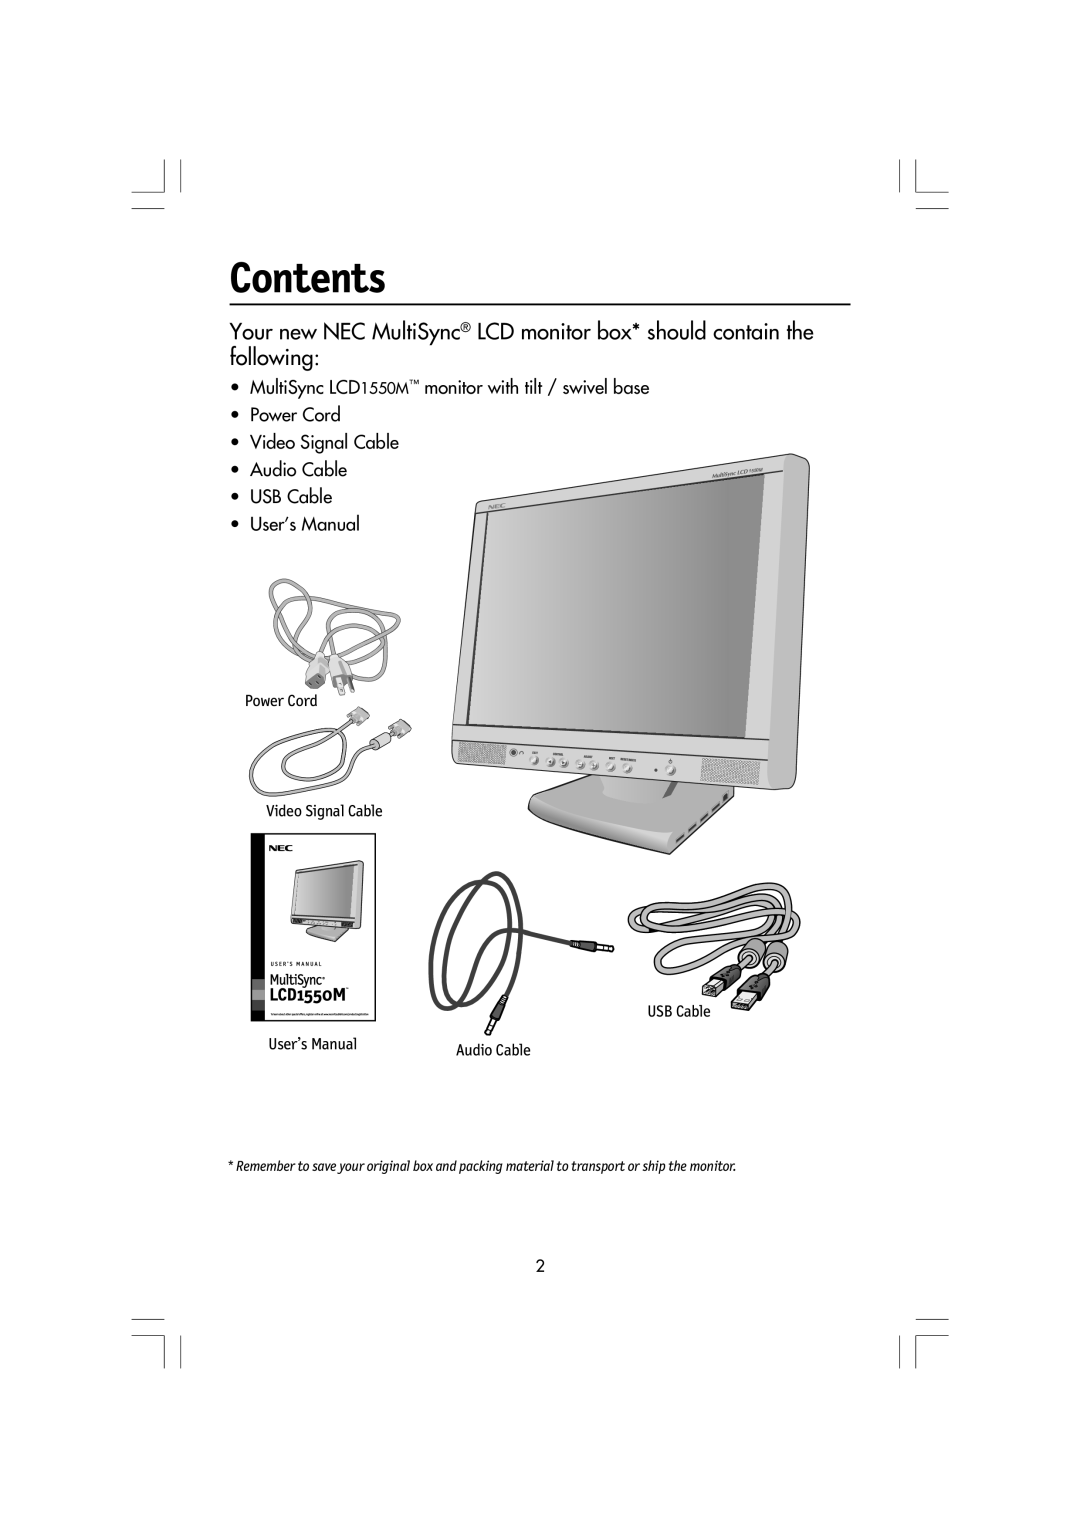 NEC LCD1550M Contents, Your new NEC MultiSync¨ LCD monitor box* should contain the following, User’s Manual, Audio Cable 